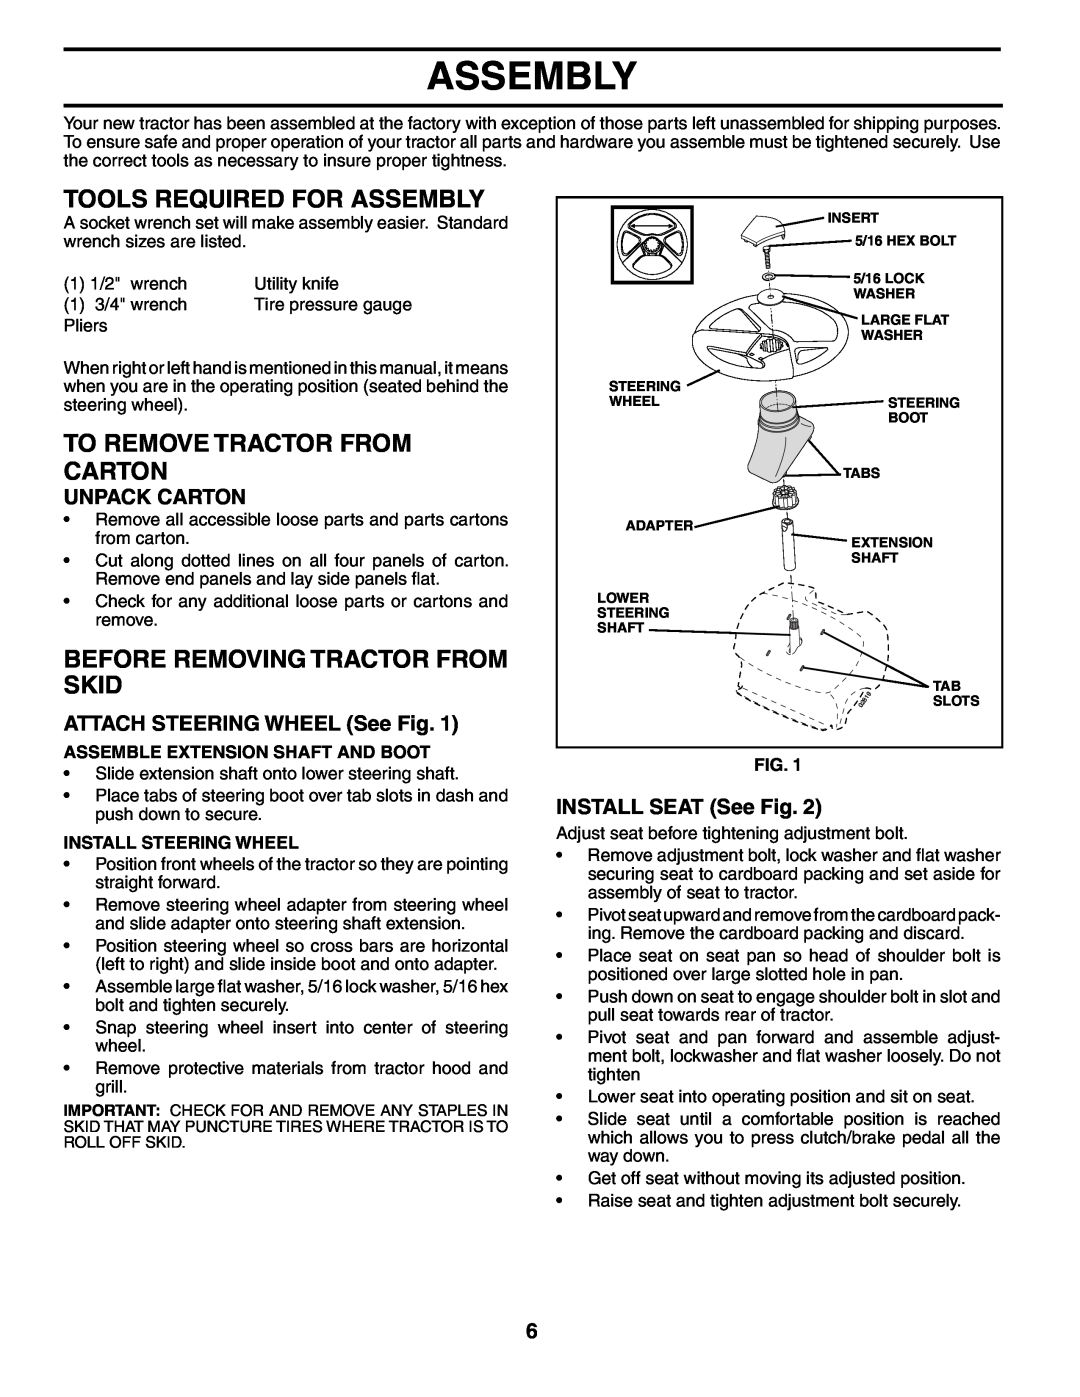 Weed Eater 195383 manual Tools Required For Assembly, To Remove Tractor From Carton, Before Removing Tractor From Skid 